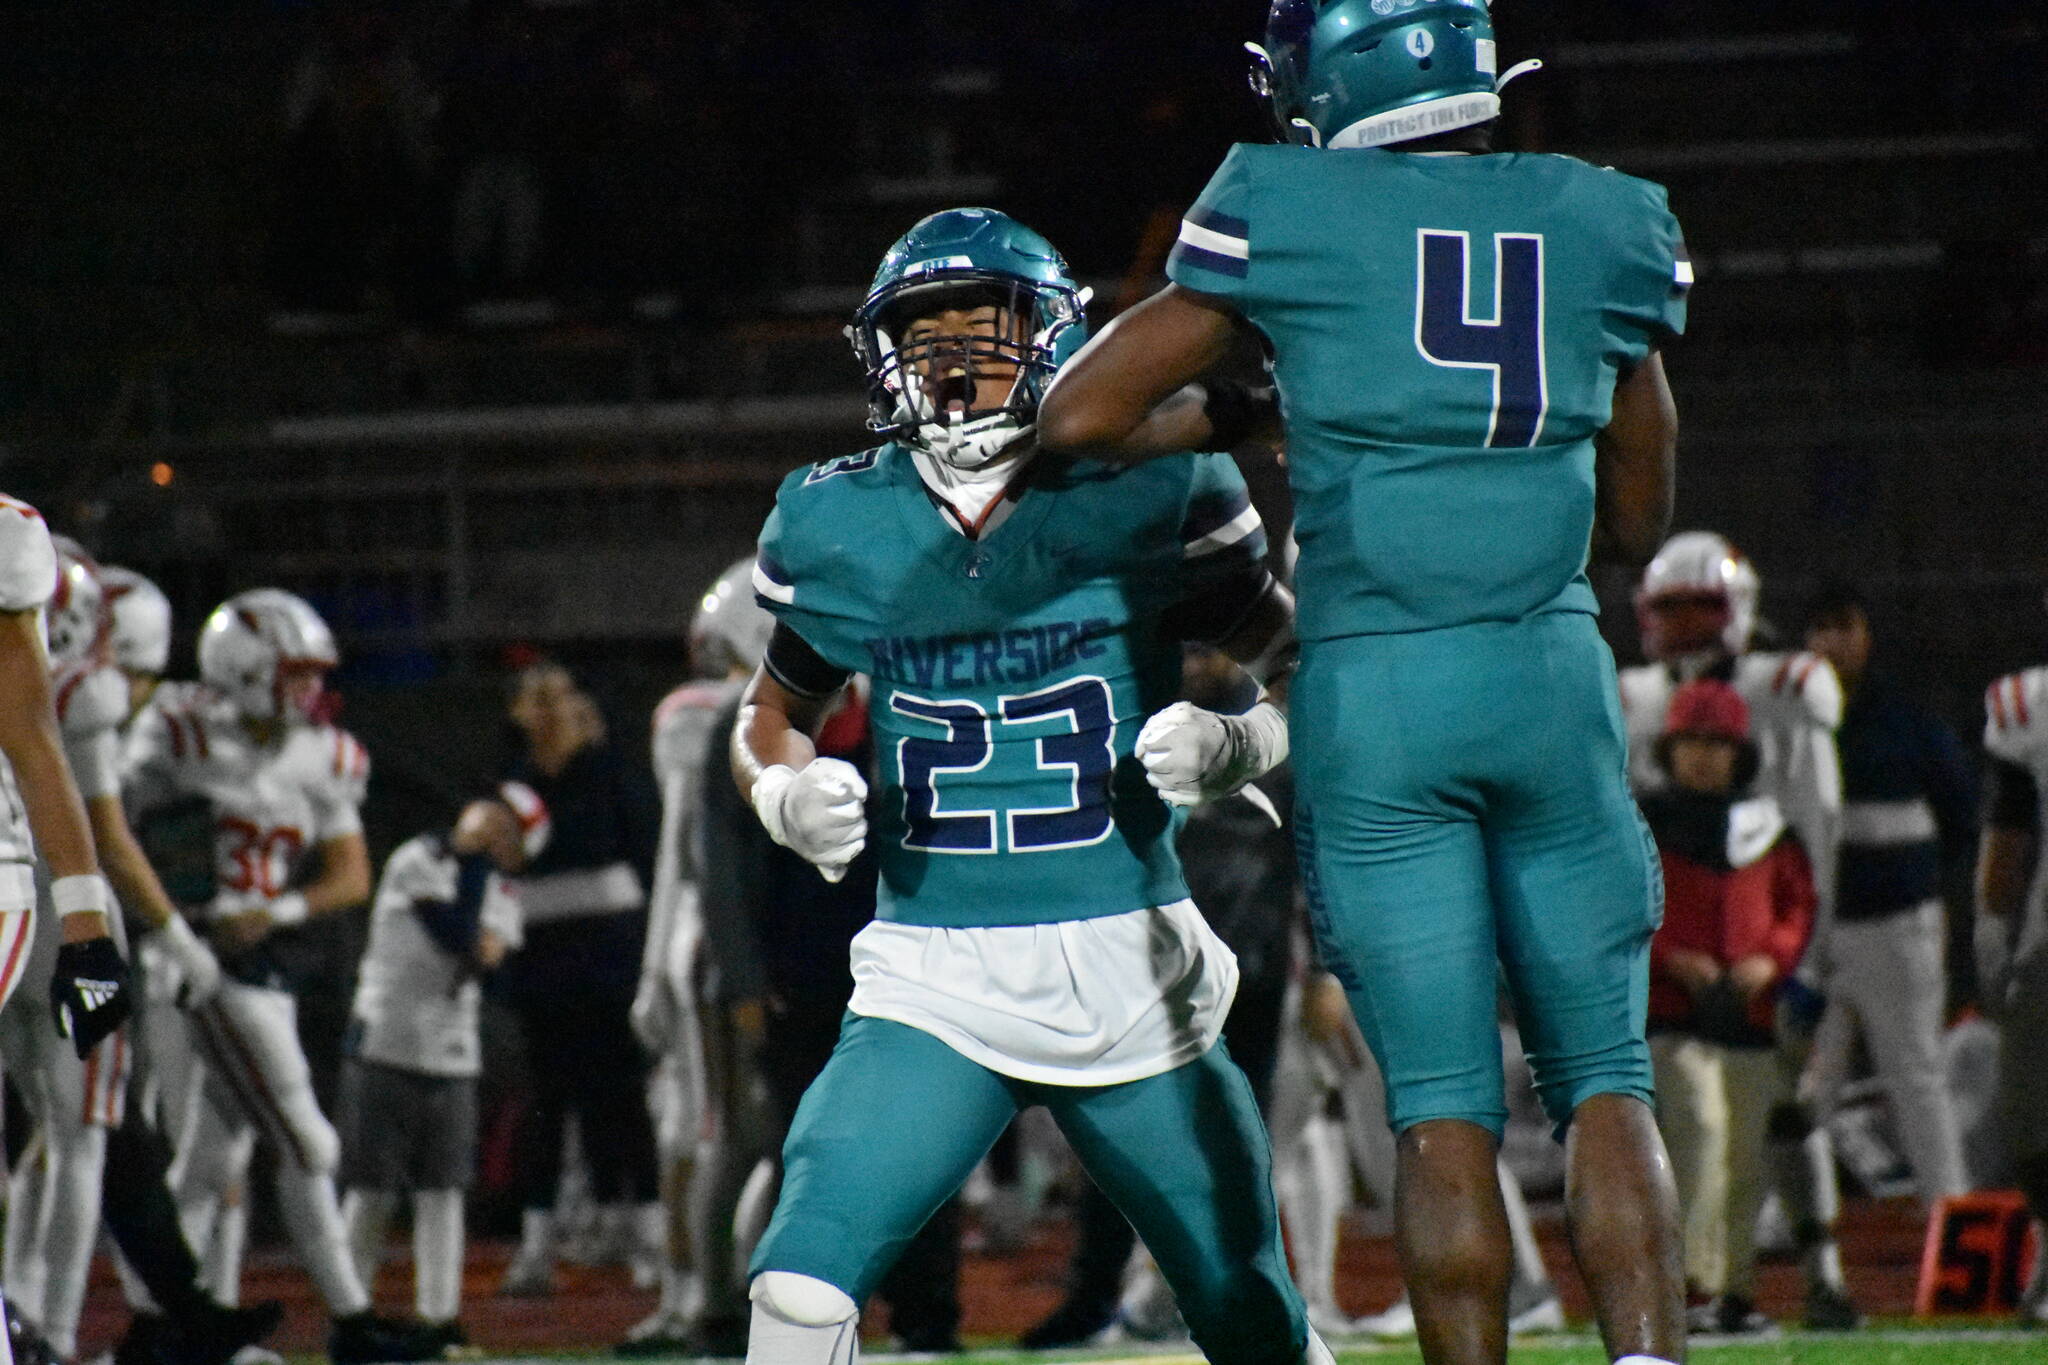 Jordan Hefa and Jonathan Epperson celebrate after a stop on defense. Ben Ray / The Reporter